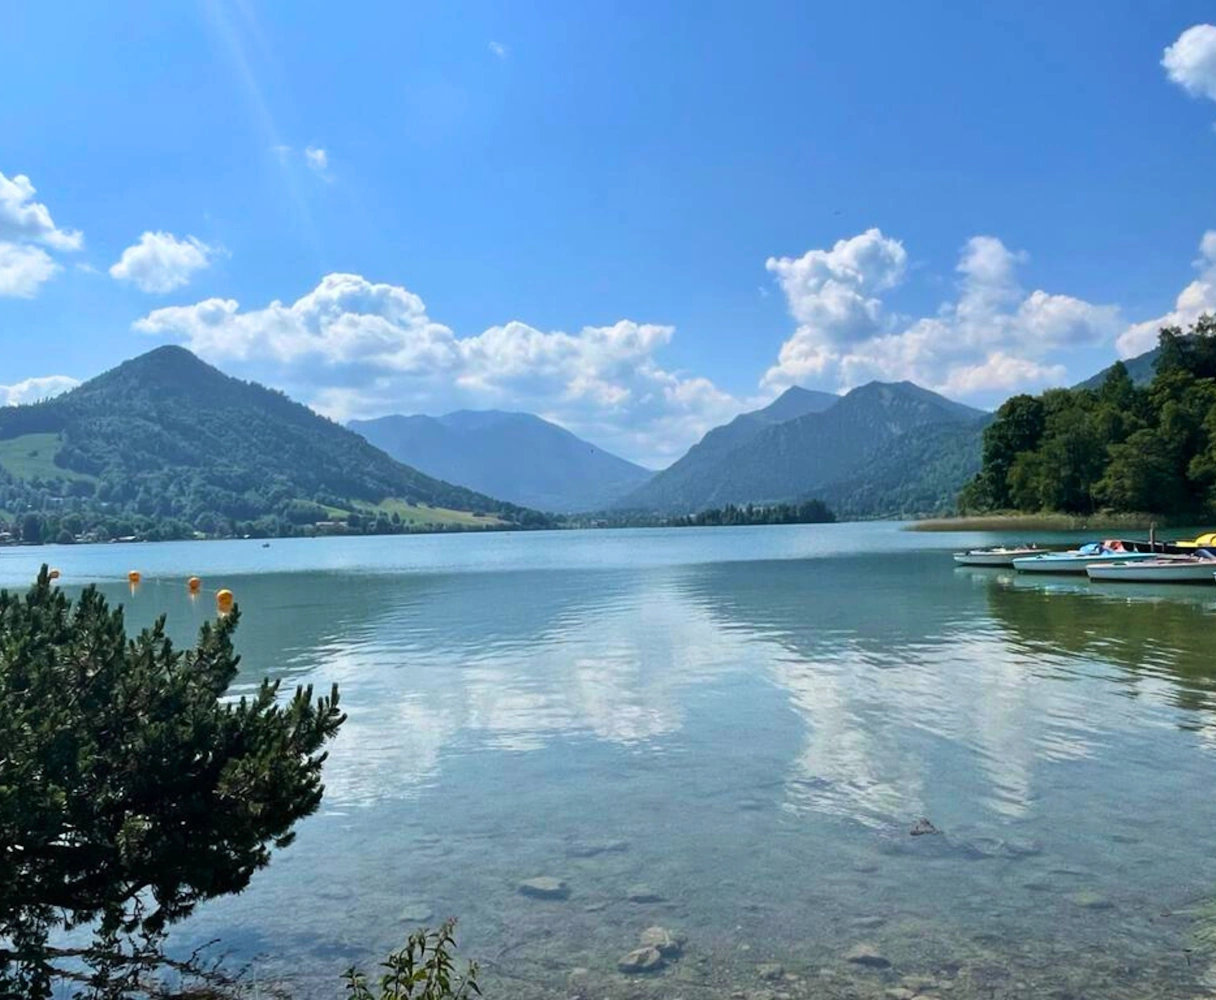 View of Lake Schliersee, with the mountains in the background